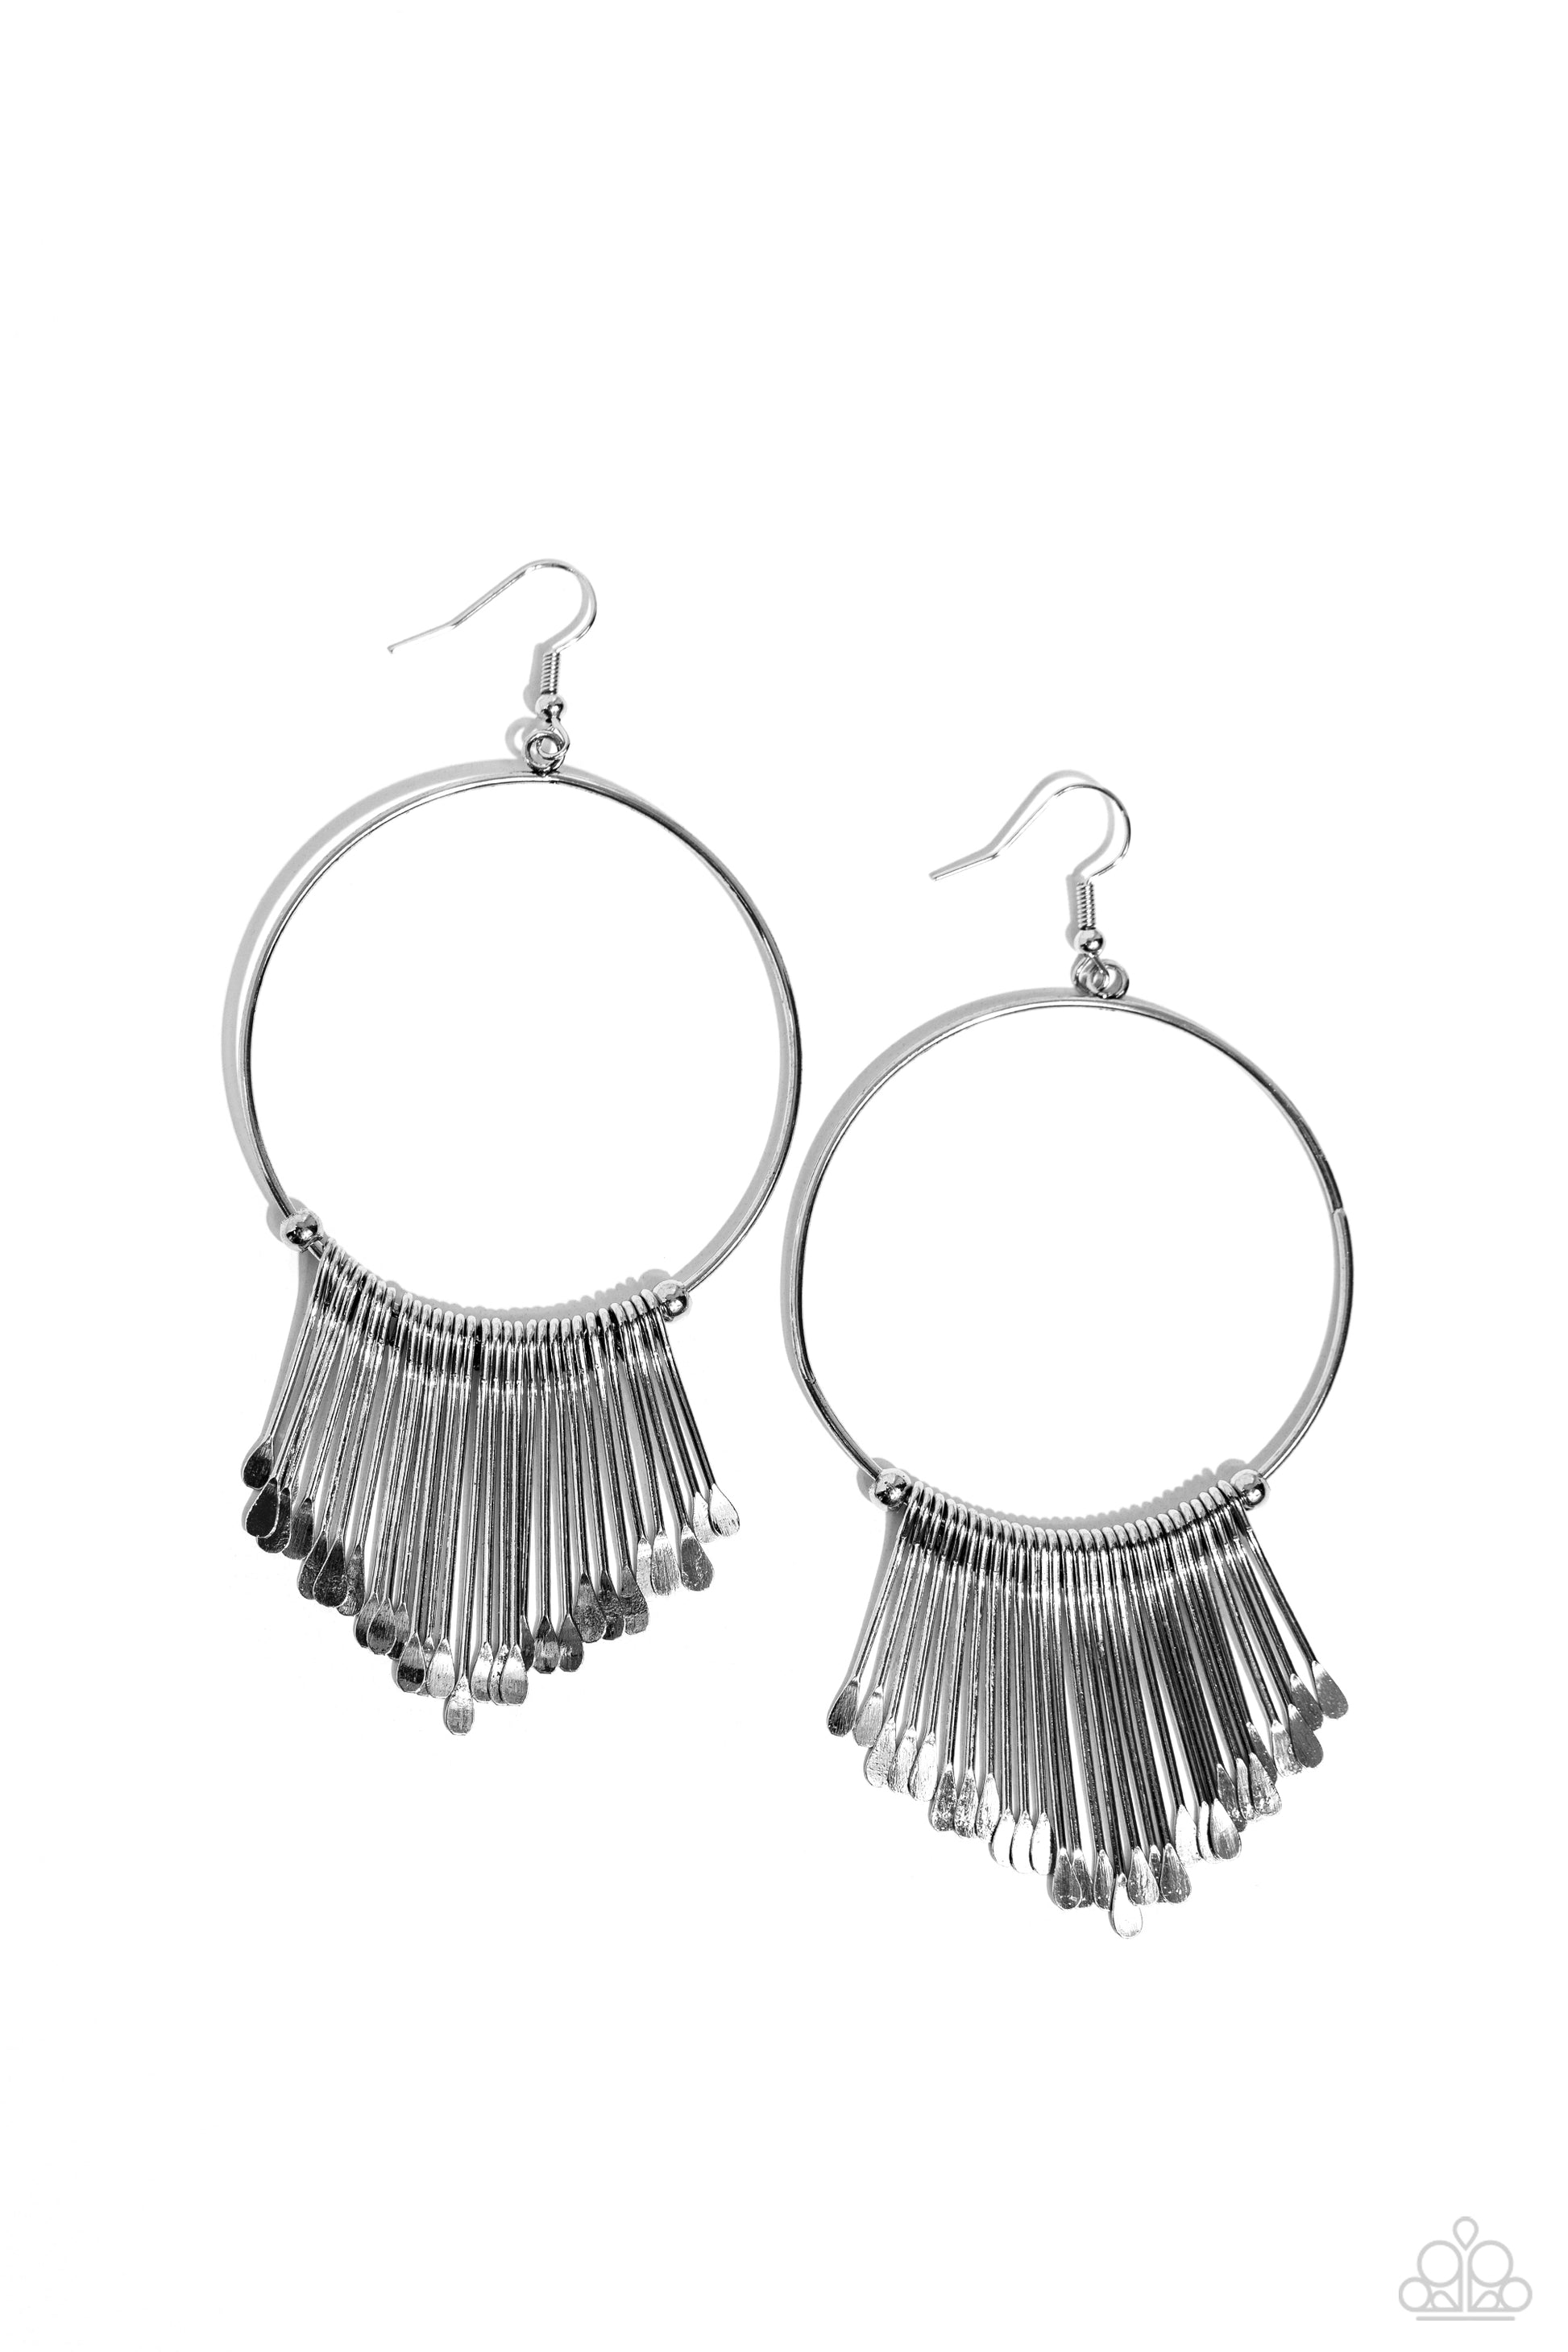 Paparazzi Accessories - The Little Dipper - Silver Earrings a glistening collection of flat silver ladle-like rods swings from the bottom of a silver wire hoop, resulting in an edgy fringe. Earring attaches to a standard fishhook fitting.  Sold as one pair of earrings.